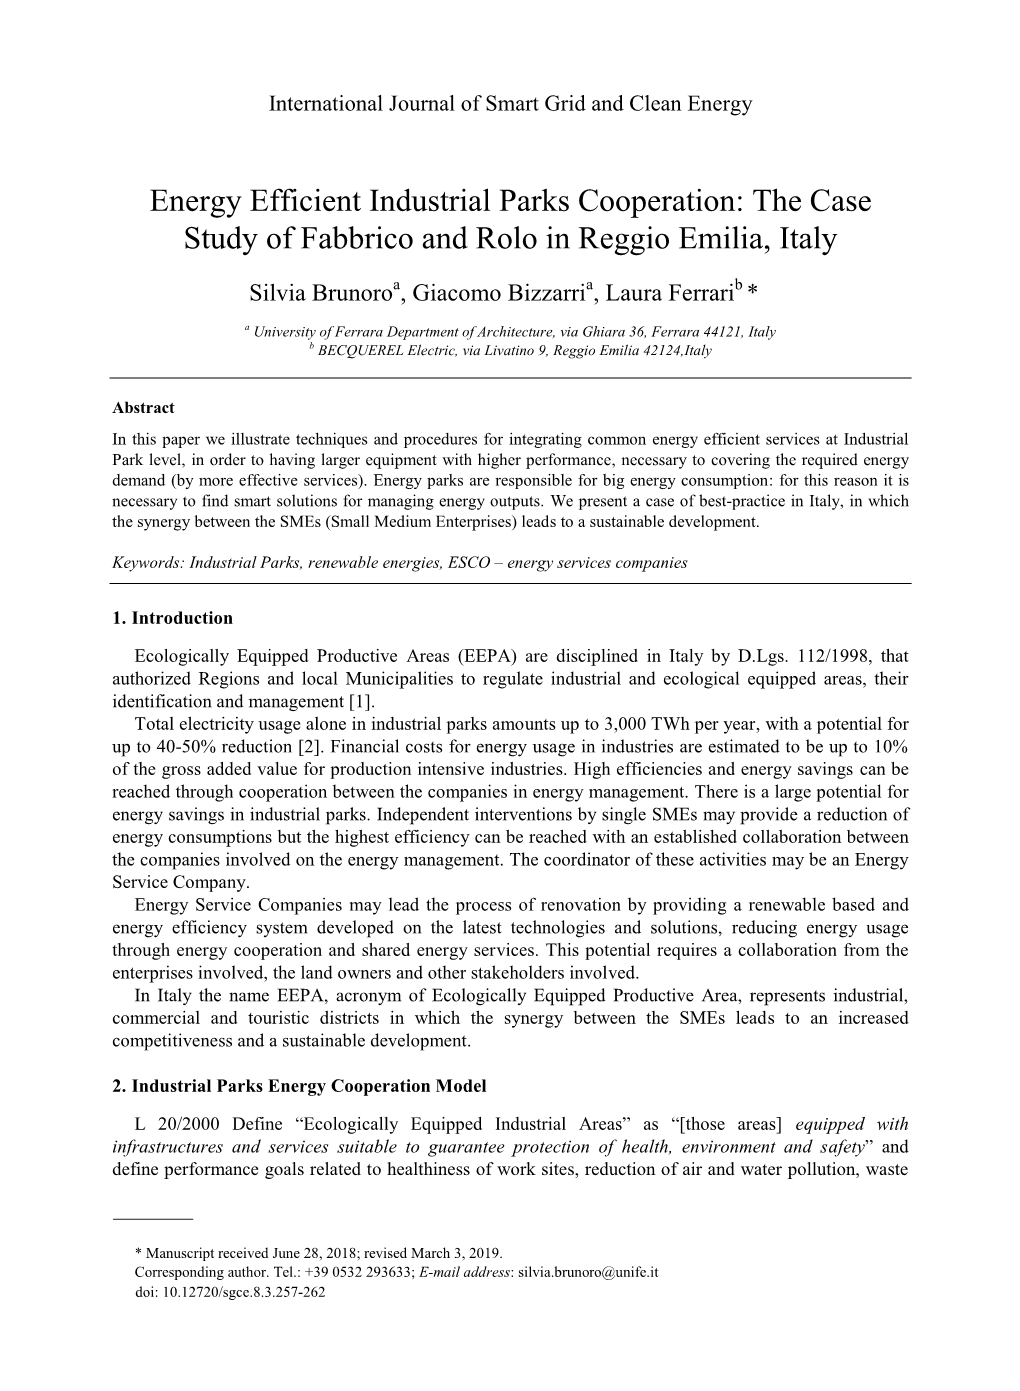 Energy Efficient Industrial Parks Cooperation: the Case Study of Fabbrico and Rolo in Reggio Emilia, Italy